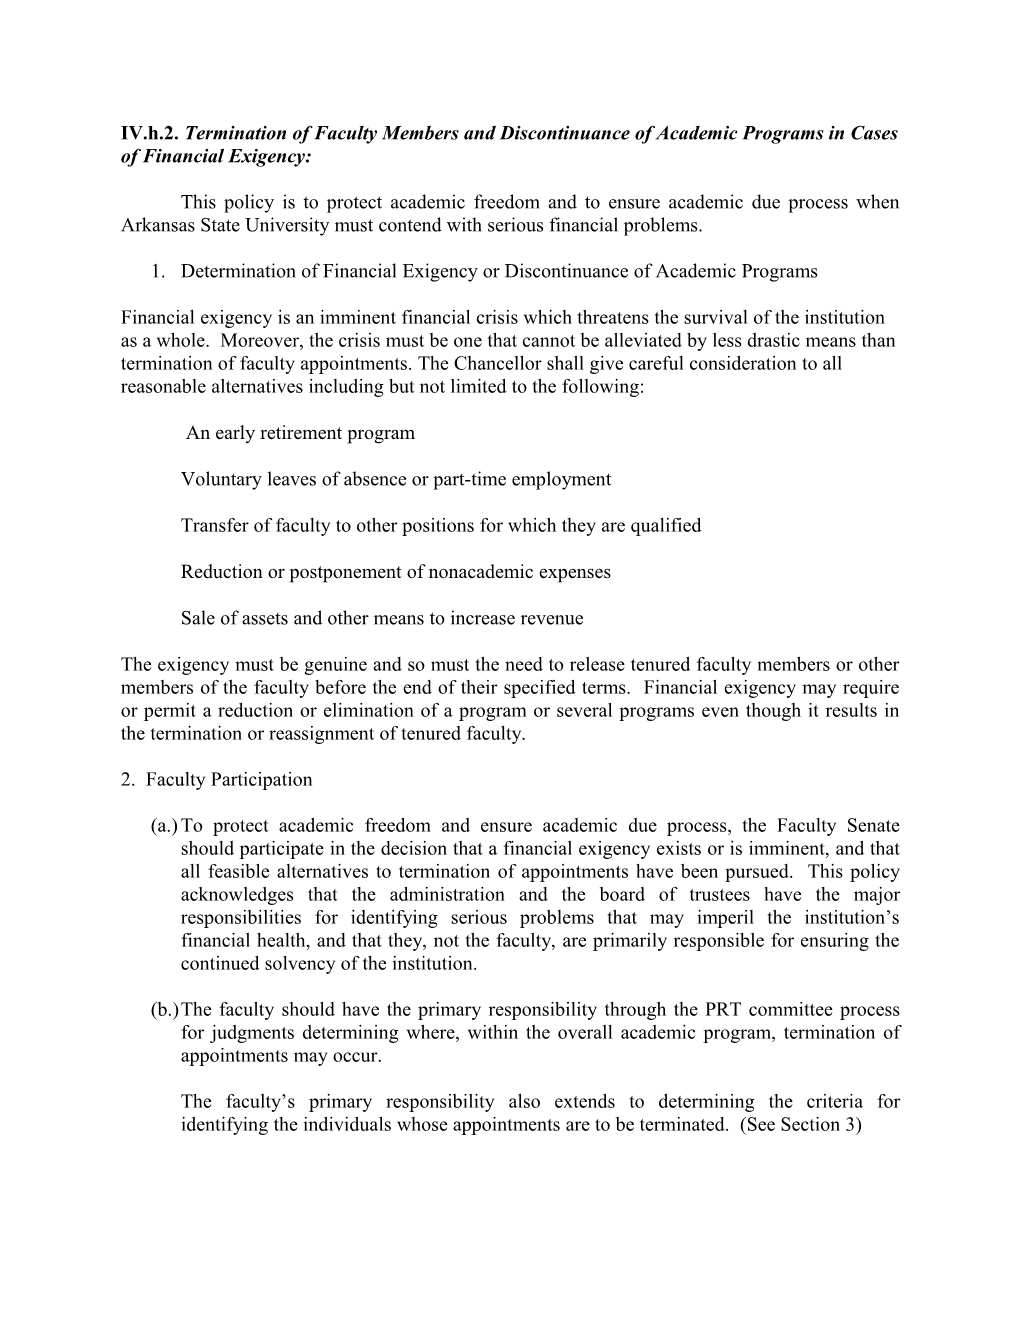 IV.H.2. Termination of Faculty Members and Discontinuance of Academic Programs in Cases